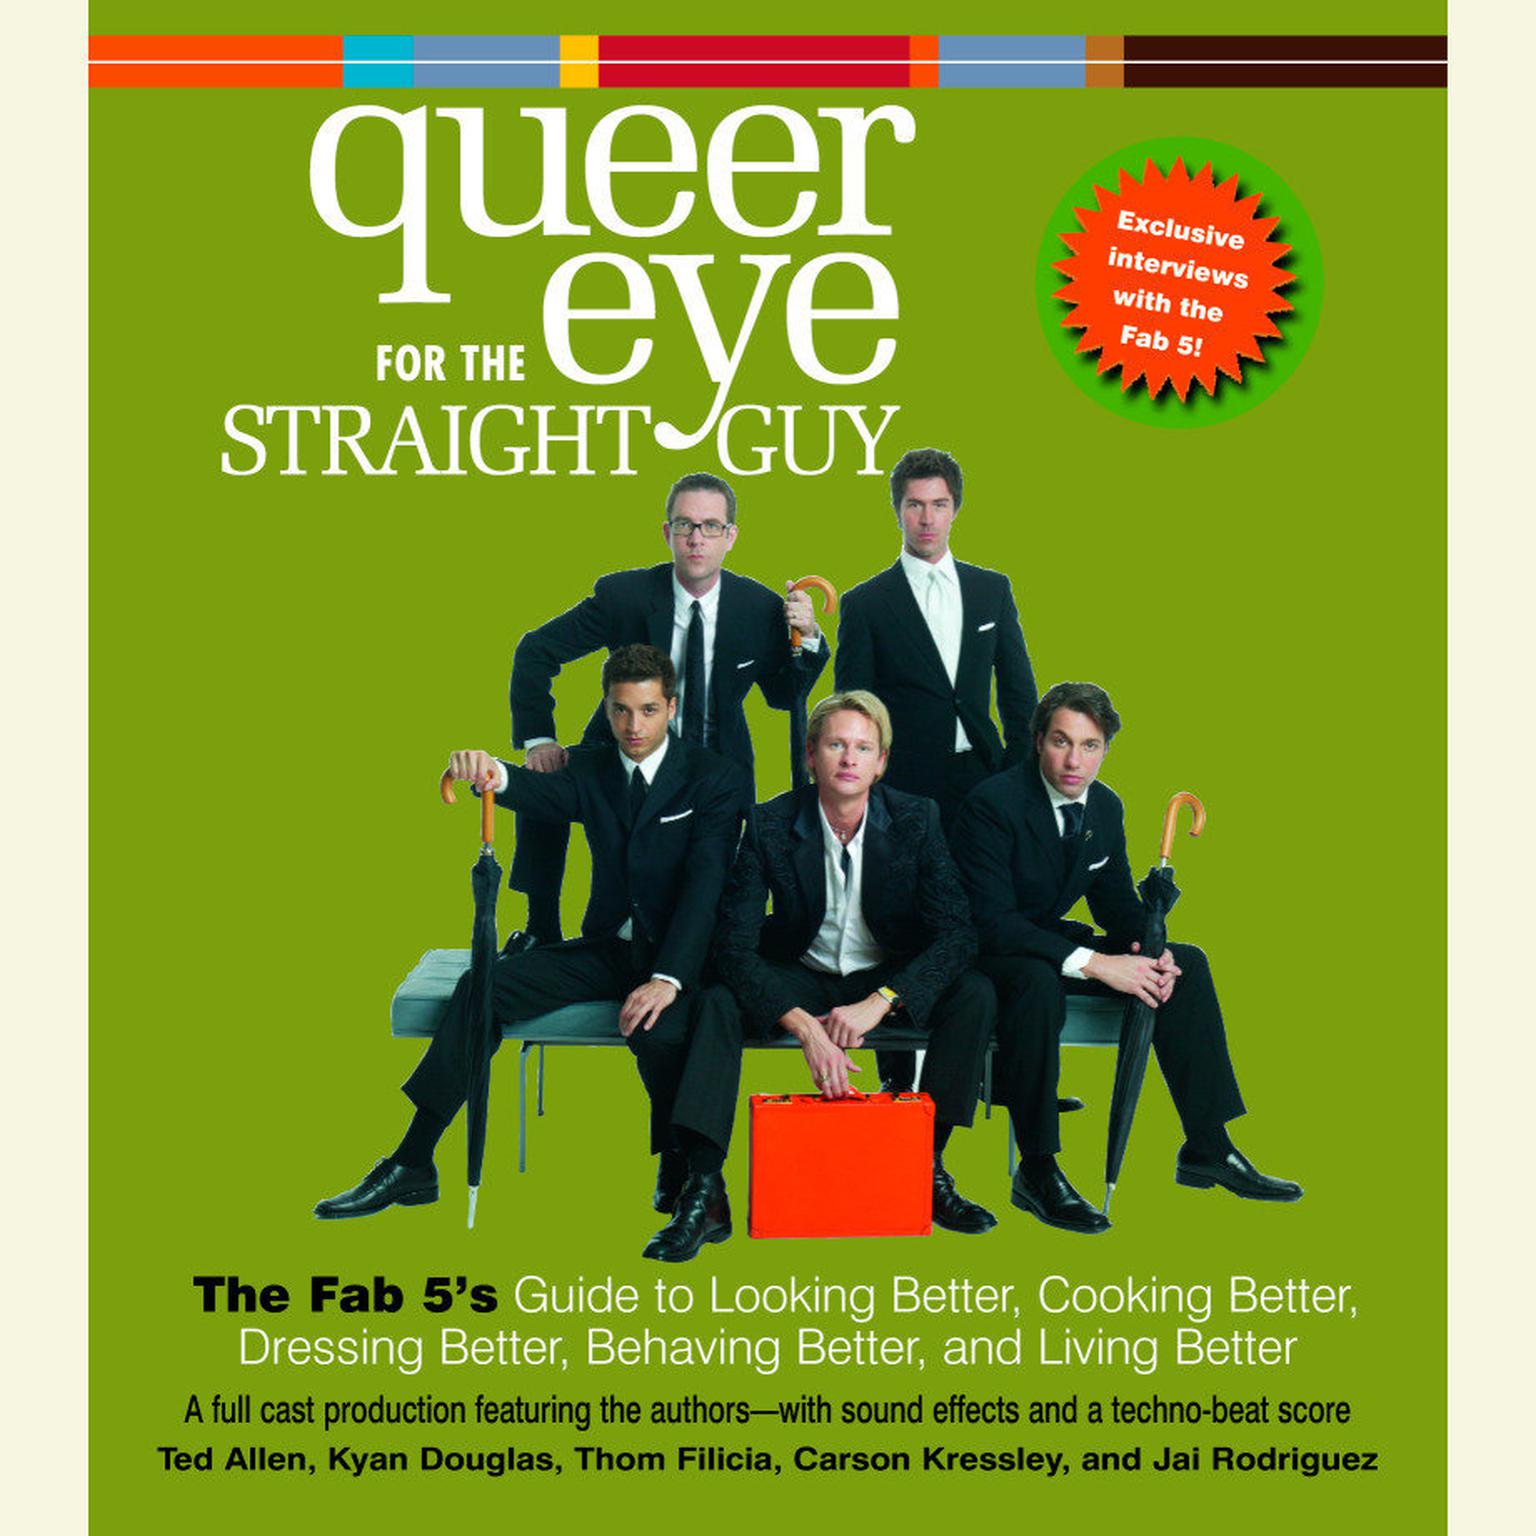 Queer Eye For the Straight Guy (Abridged): The Fab 5s Guide to Looking Better, Cooking Better, Dressing Better, Behaving Better, and Living Better Audiobook, by Ted Allen